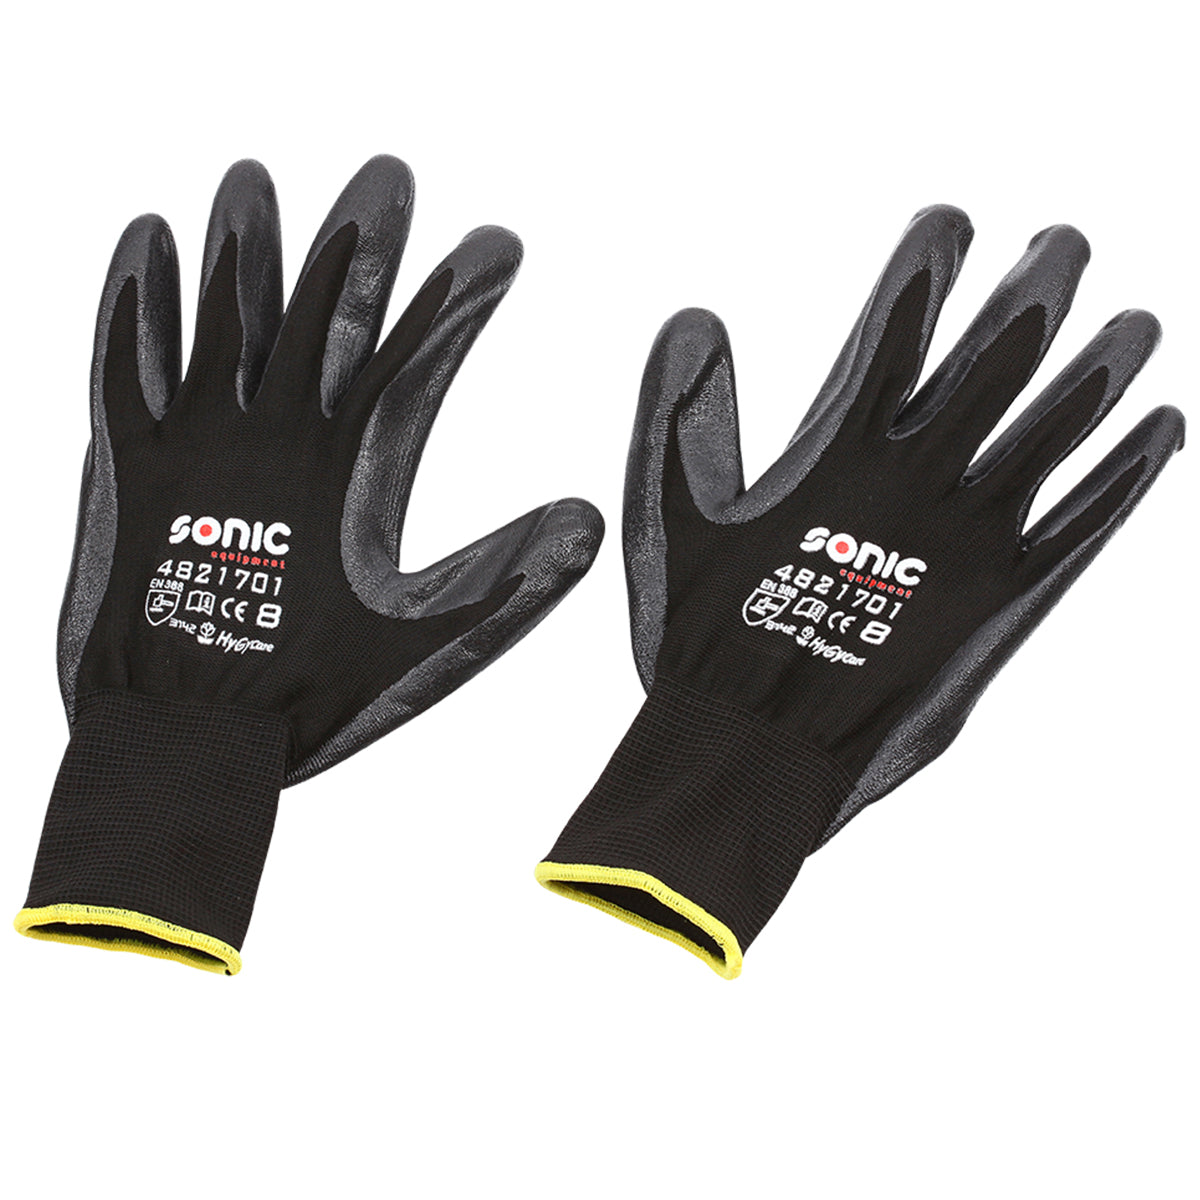 Sonic Tools Nitrile Coated Gloves-4821701